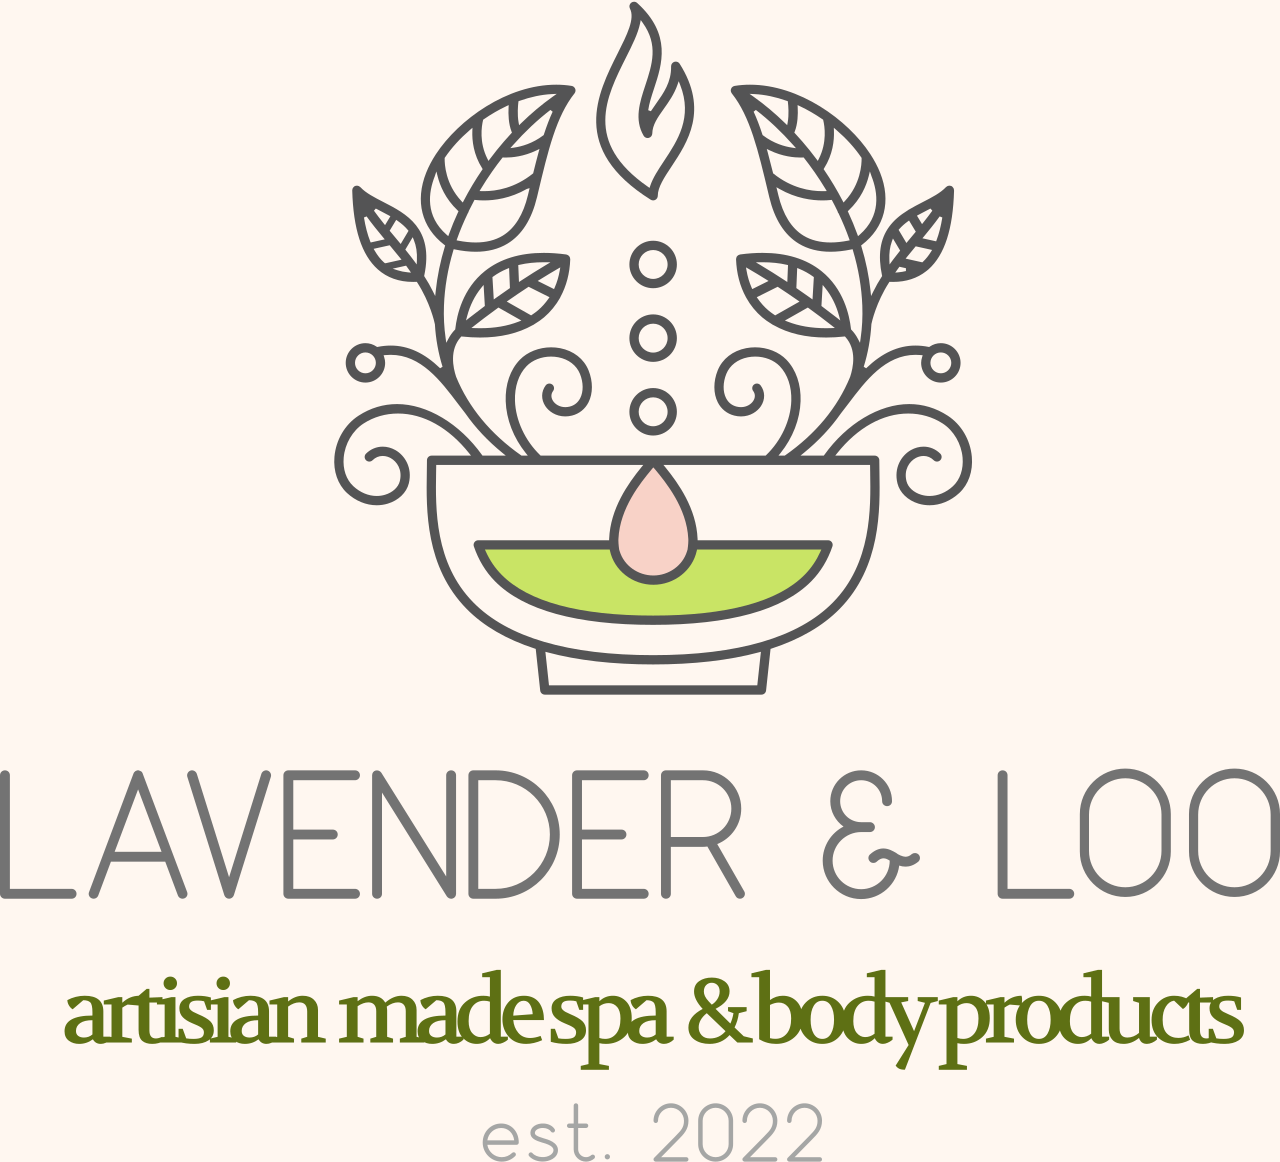 LAVENDER & LOO's web page